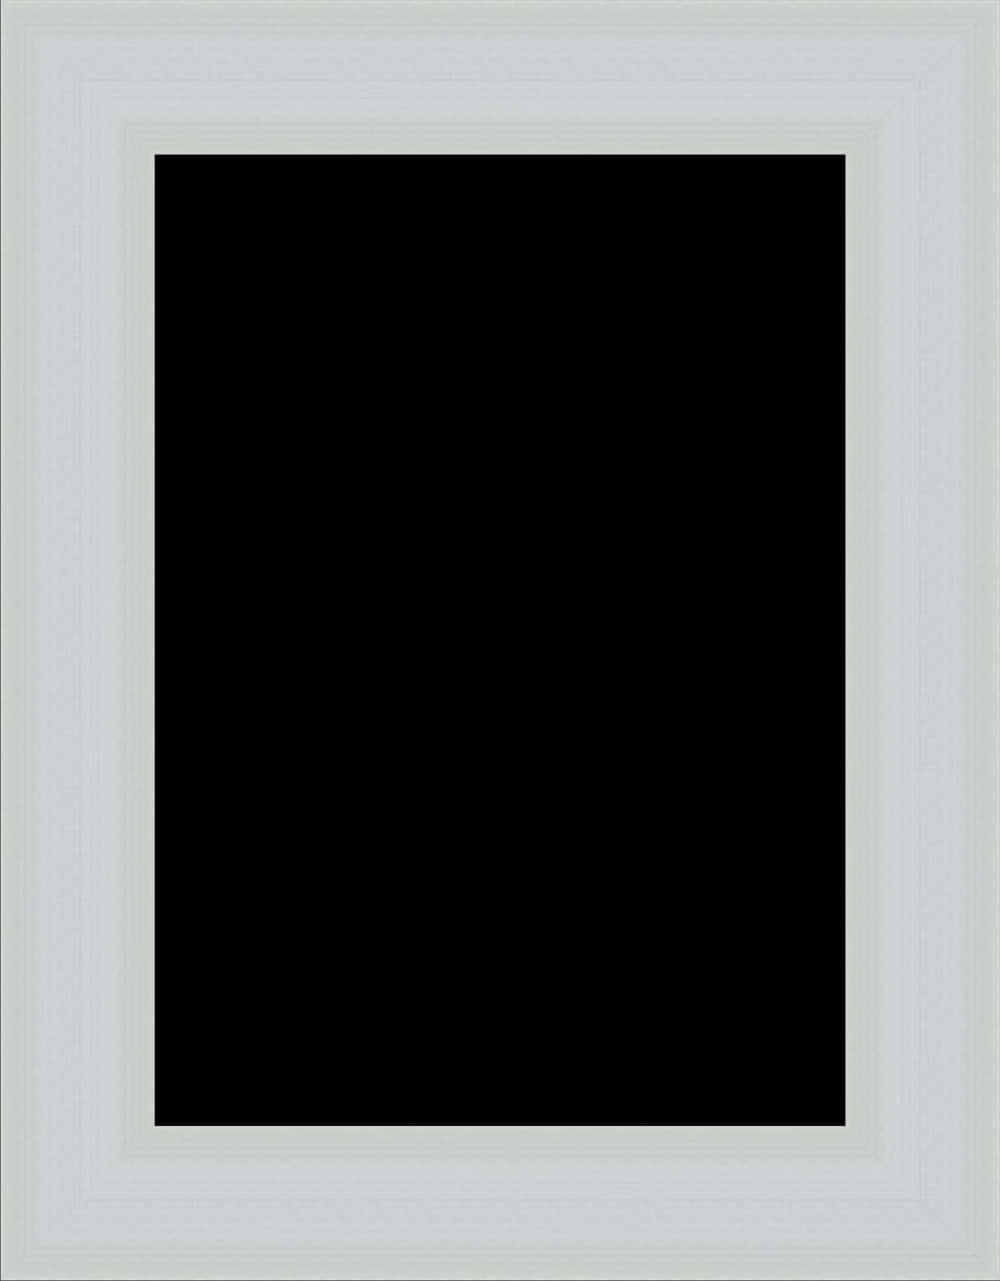 A White Frame With A Black Screen